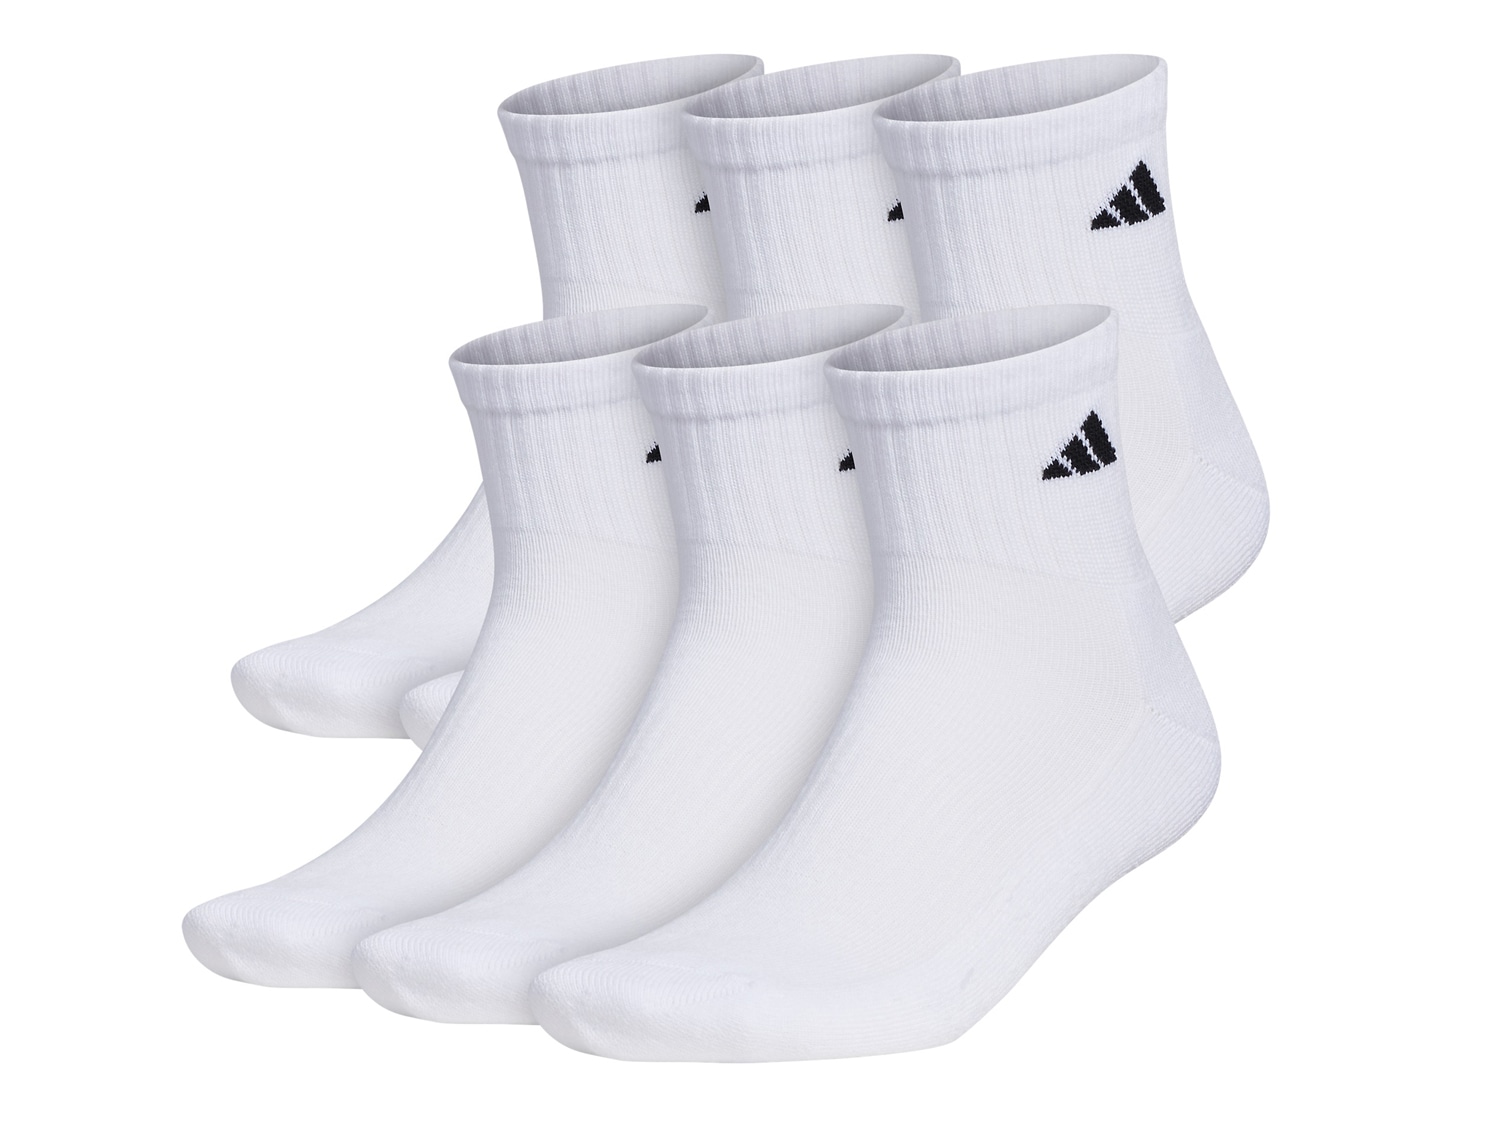 adidas Cushioned Men's Quarter Ankle Socks - 6 Pack - Free Shipping | DSW